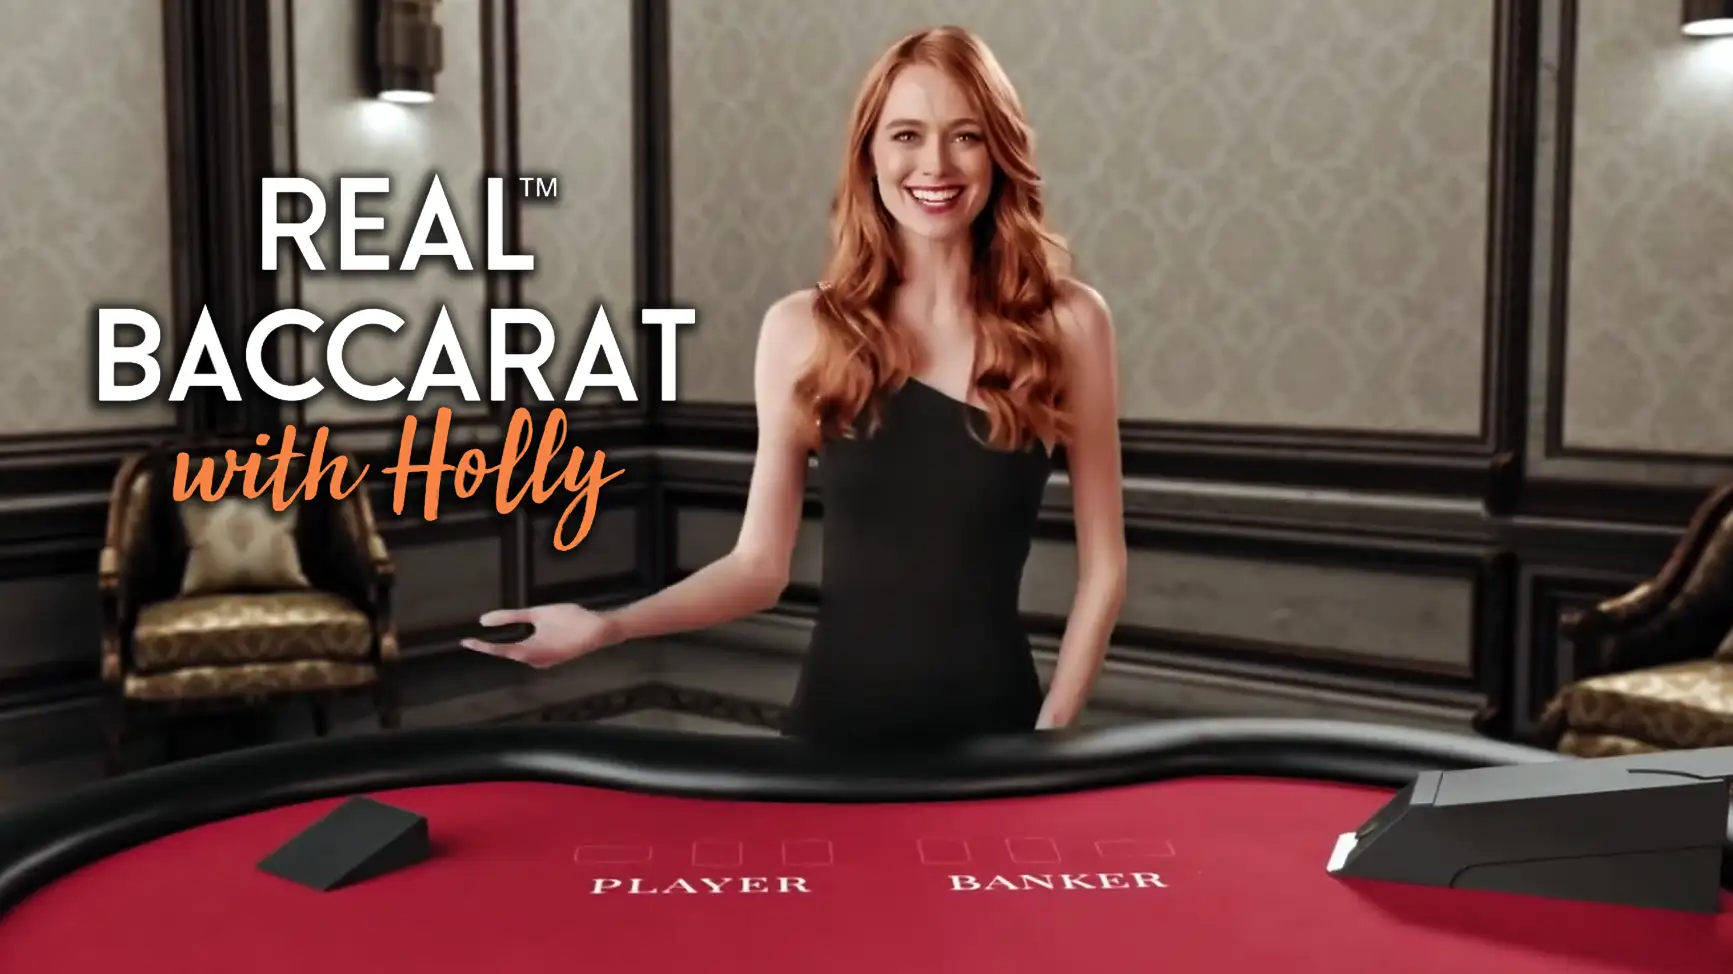 Real Baccarat with Holly demo